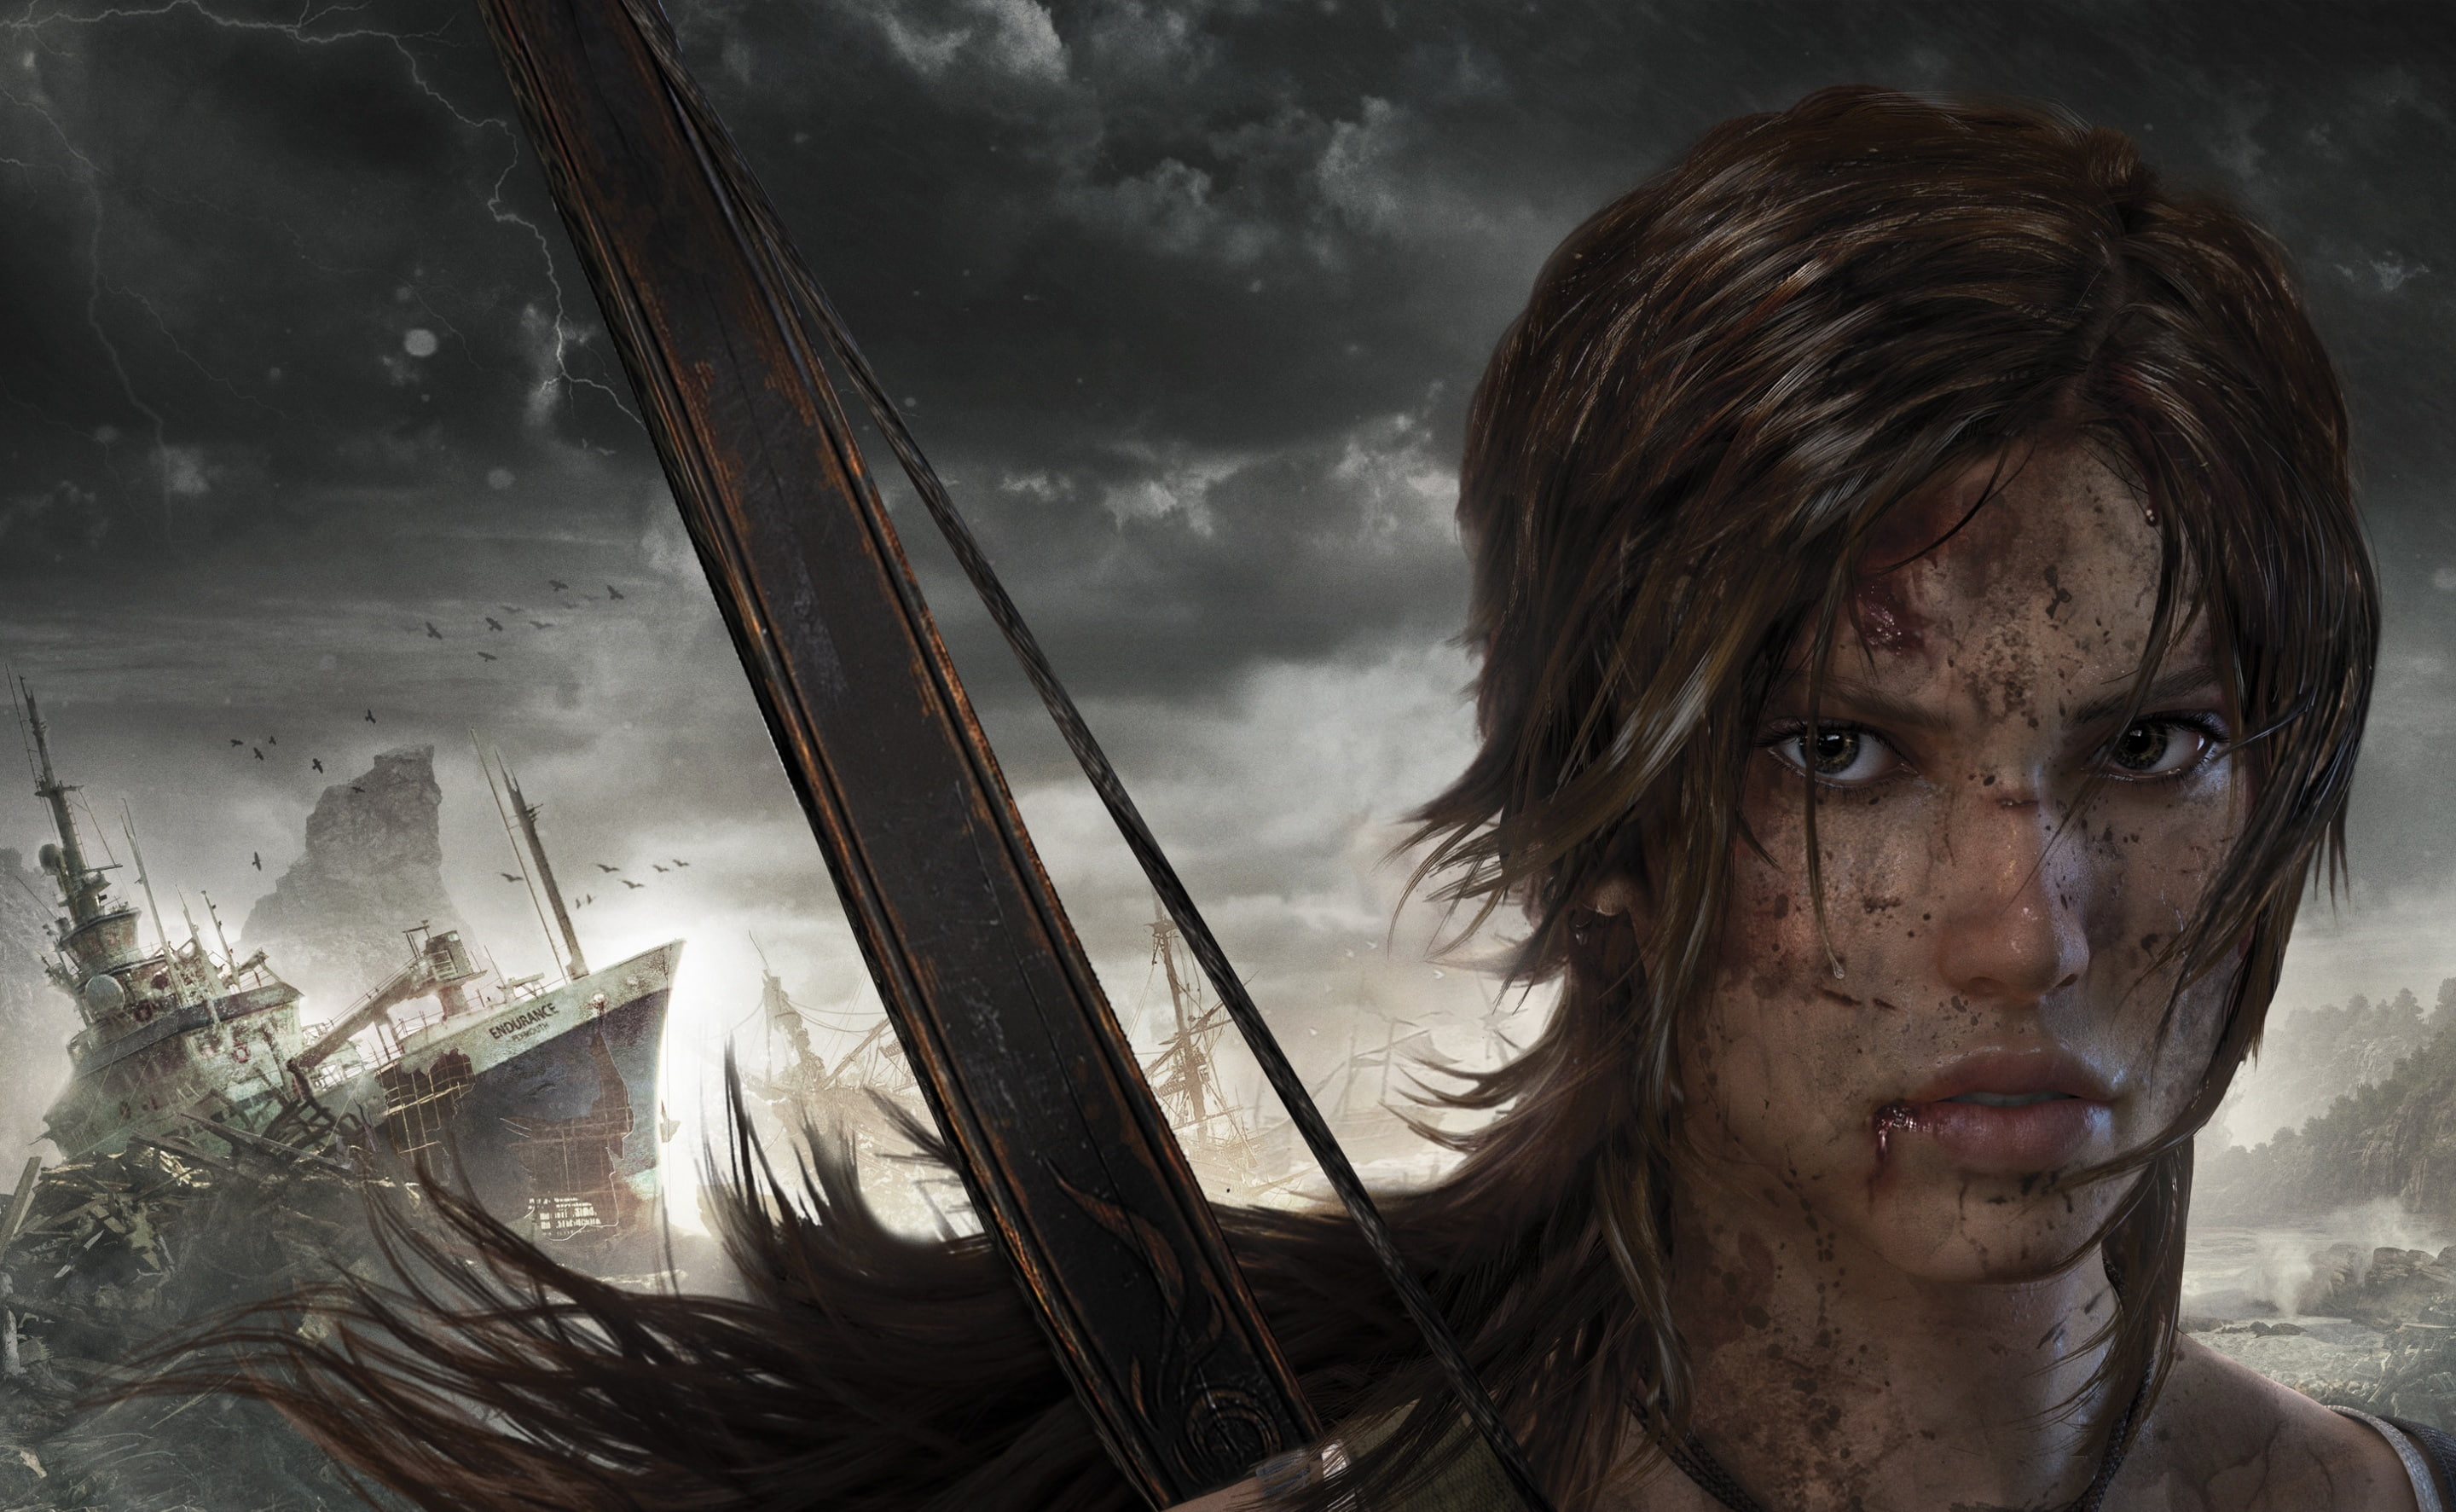 Tomb Raider 2012, The Witcher female character wallpaper, Games